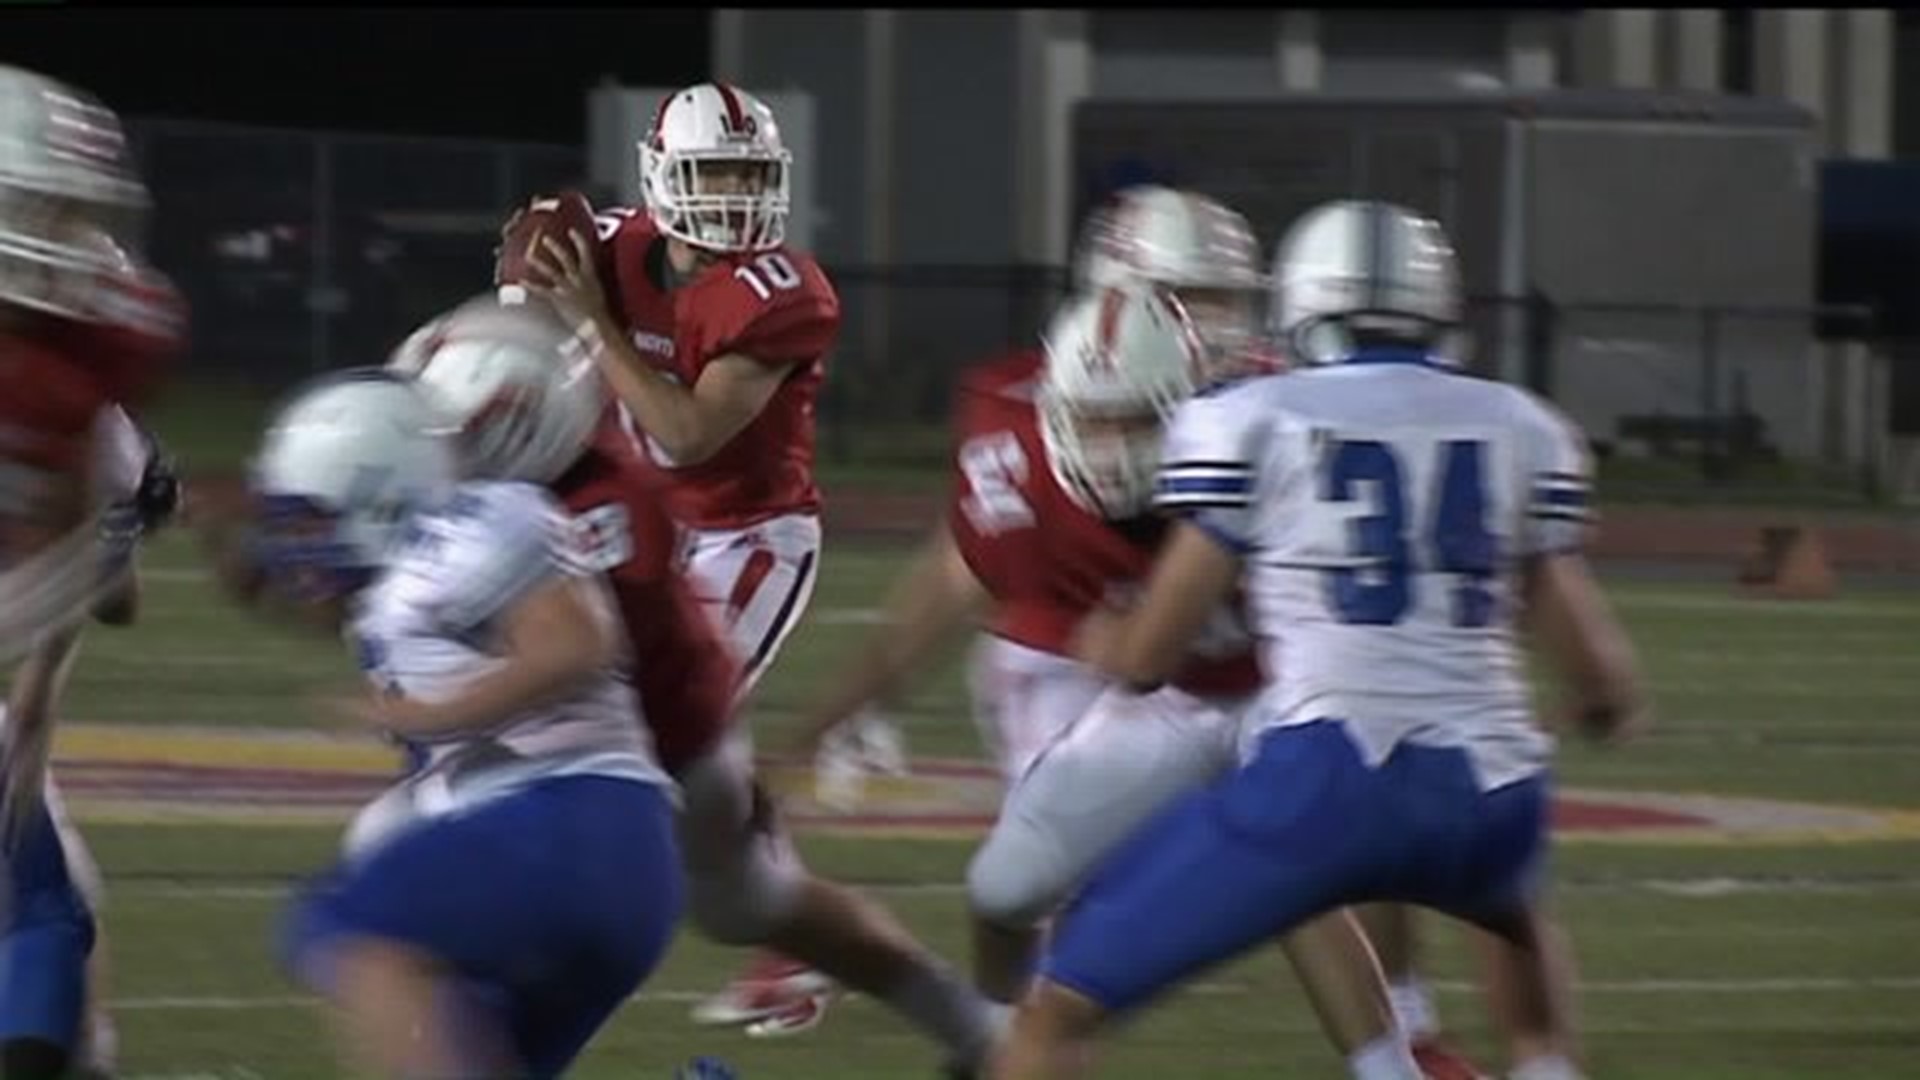 Assumption cruises to 5th straight win